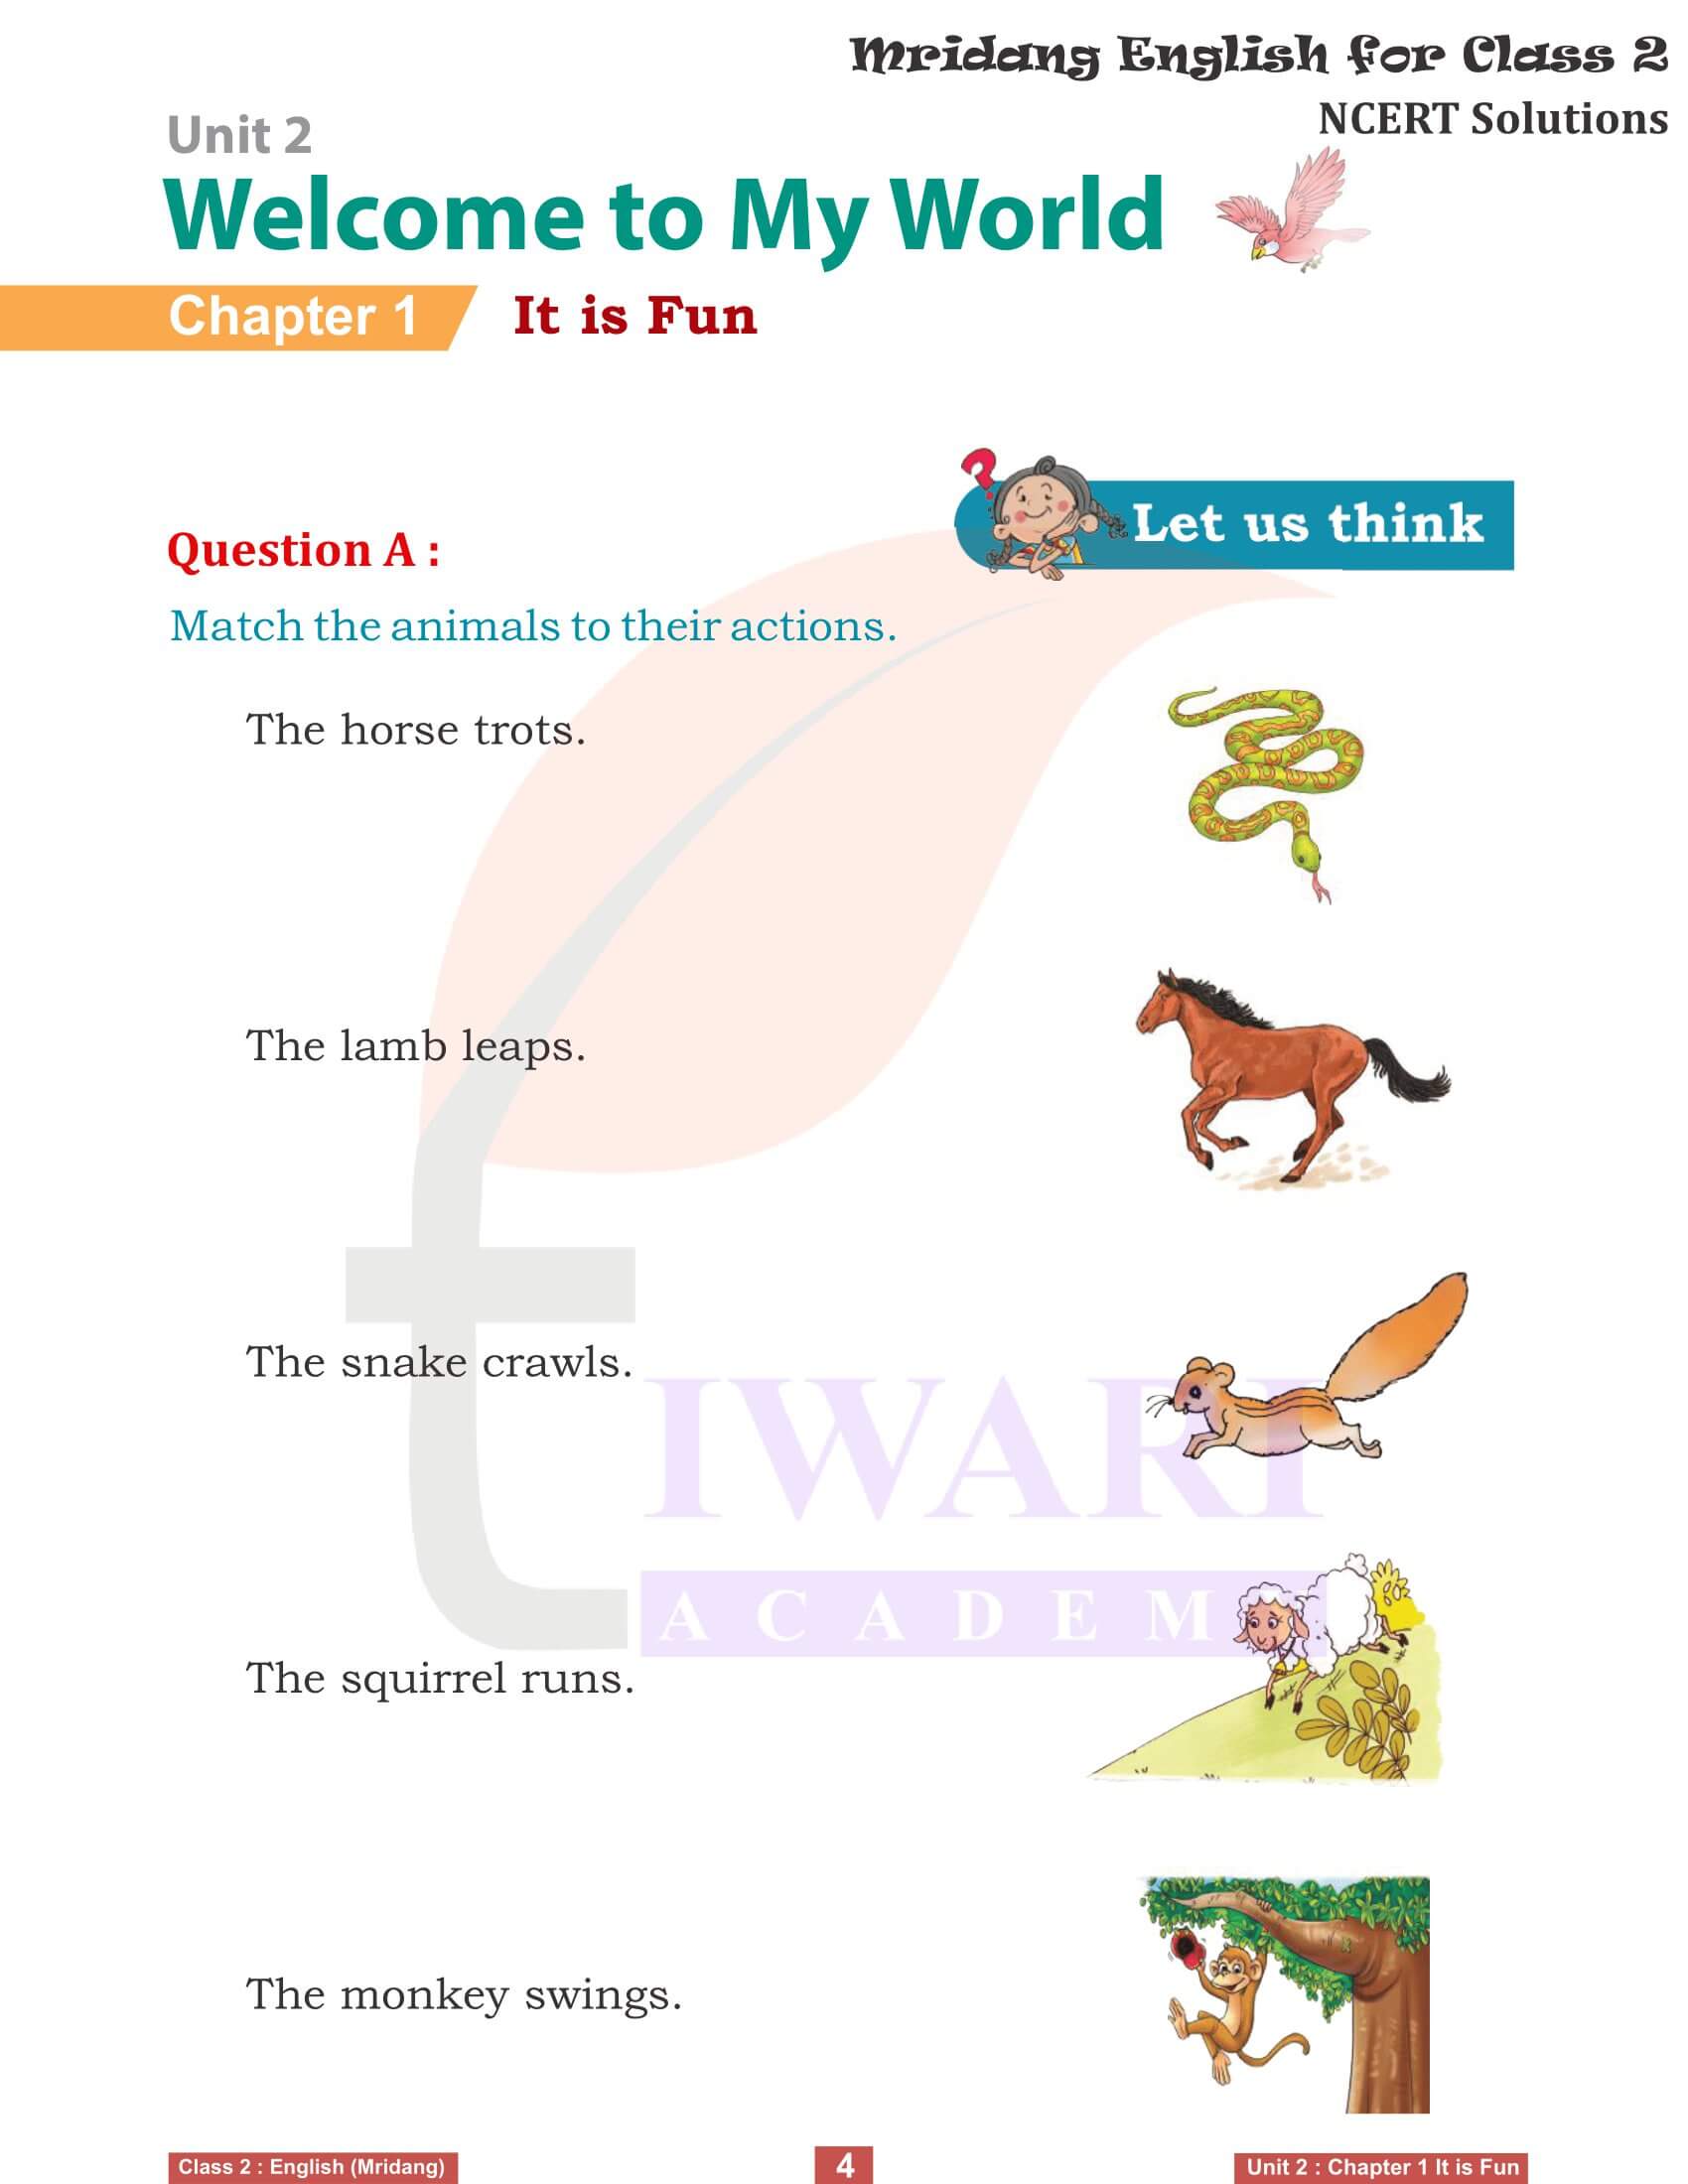 NCERT Class 2 English Mridang Unit 2 Welcome to My World Chapter 2 Seeing without Seeing